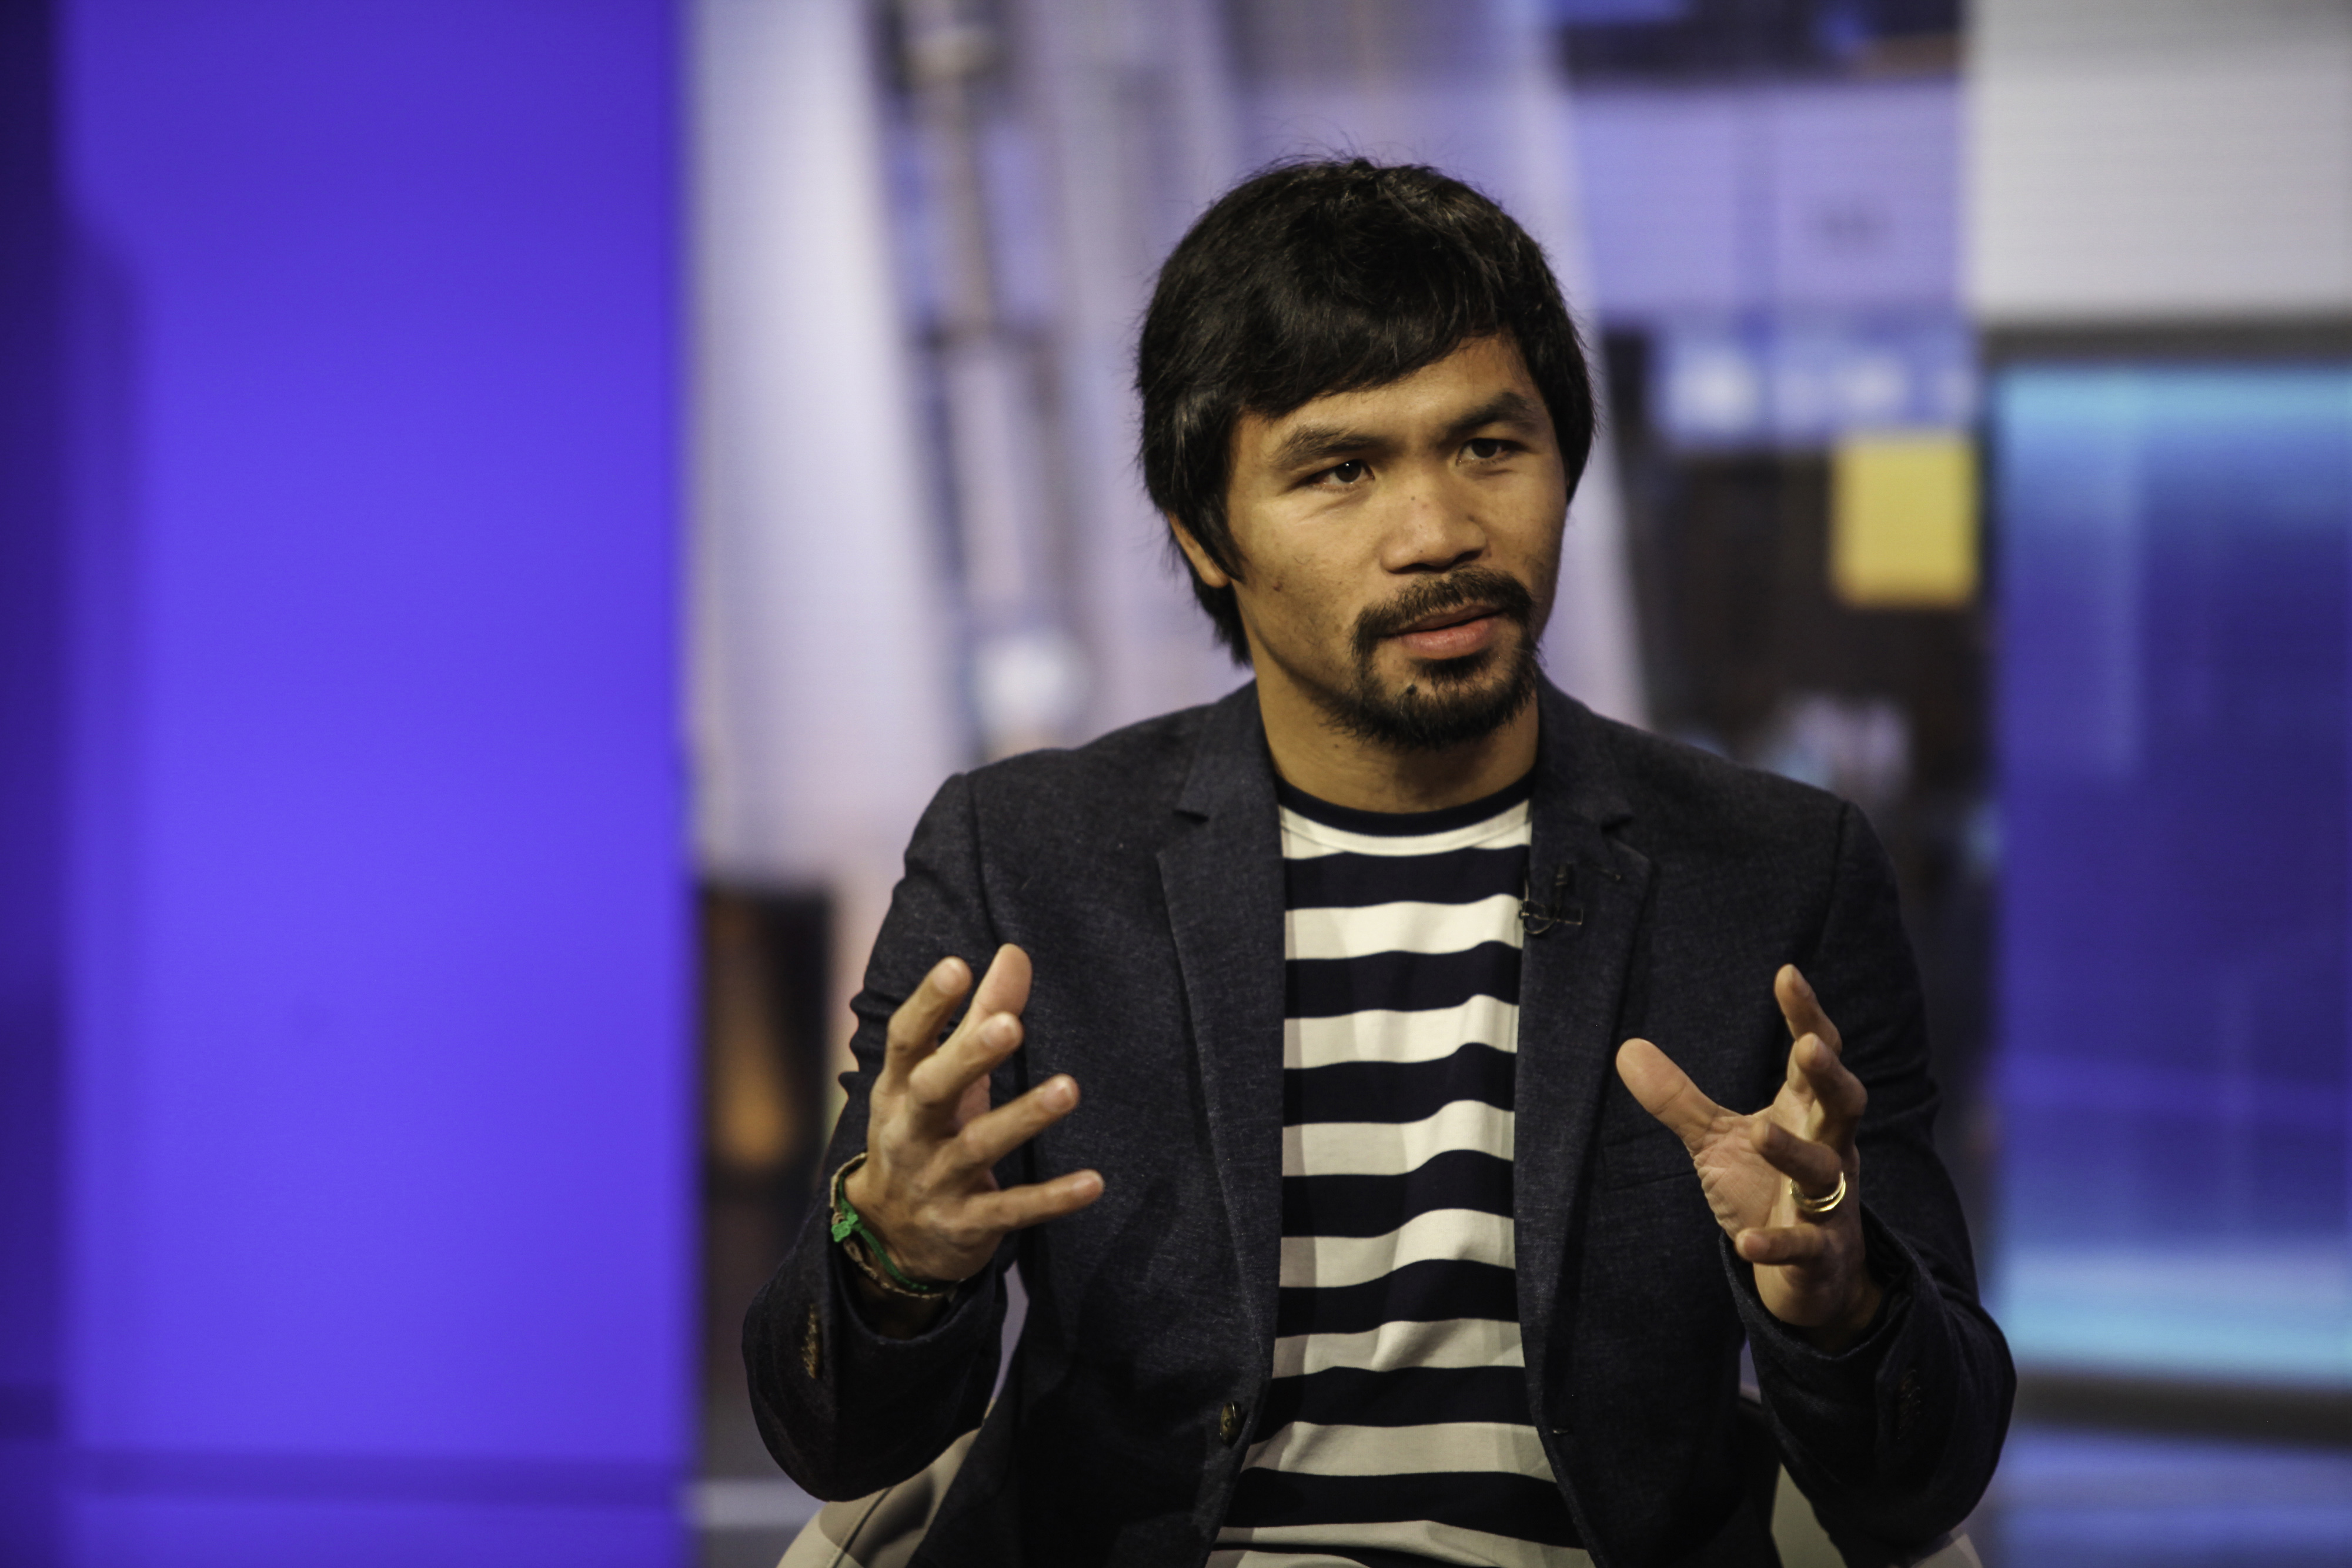 Professional boxer Manny Pacquiao speaks during a Bloomberg Television interview in New York, U.S., on Tuesday, Oct. 13, 2015. (Chris Goodney—Bloomberg)